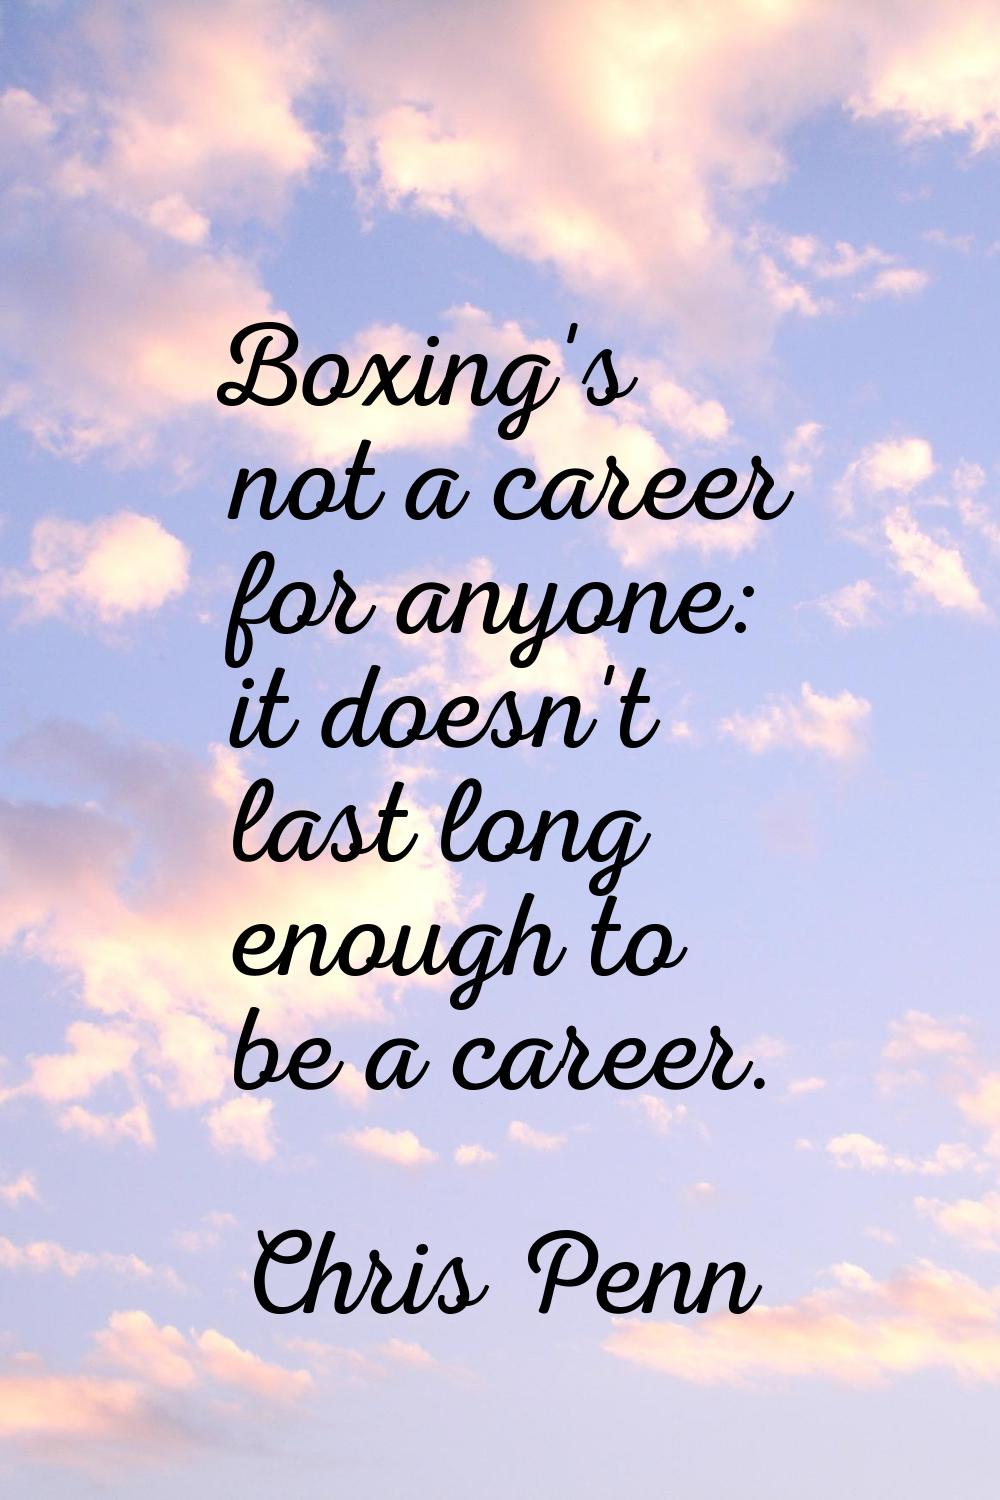 Boxing's not a career for anyone: it doesn't last long enough to be a career.